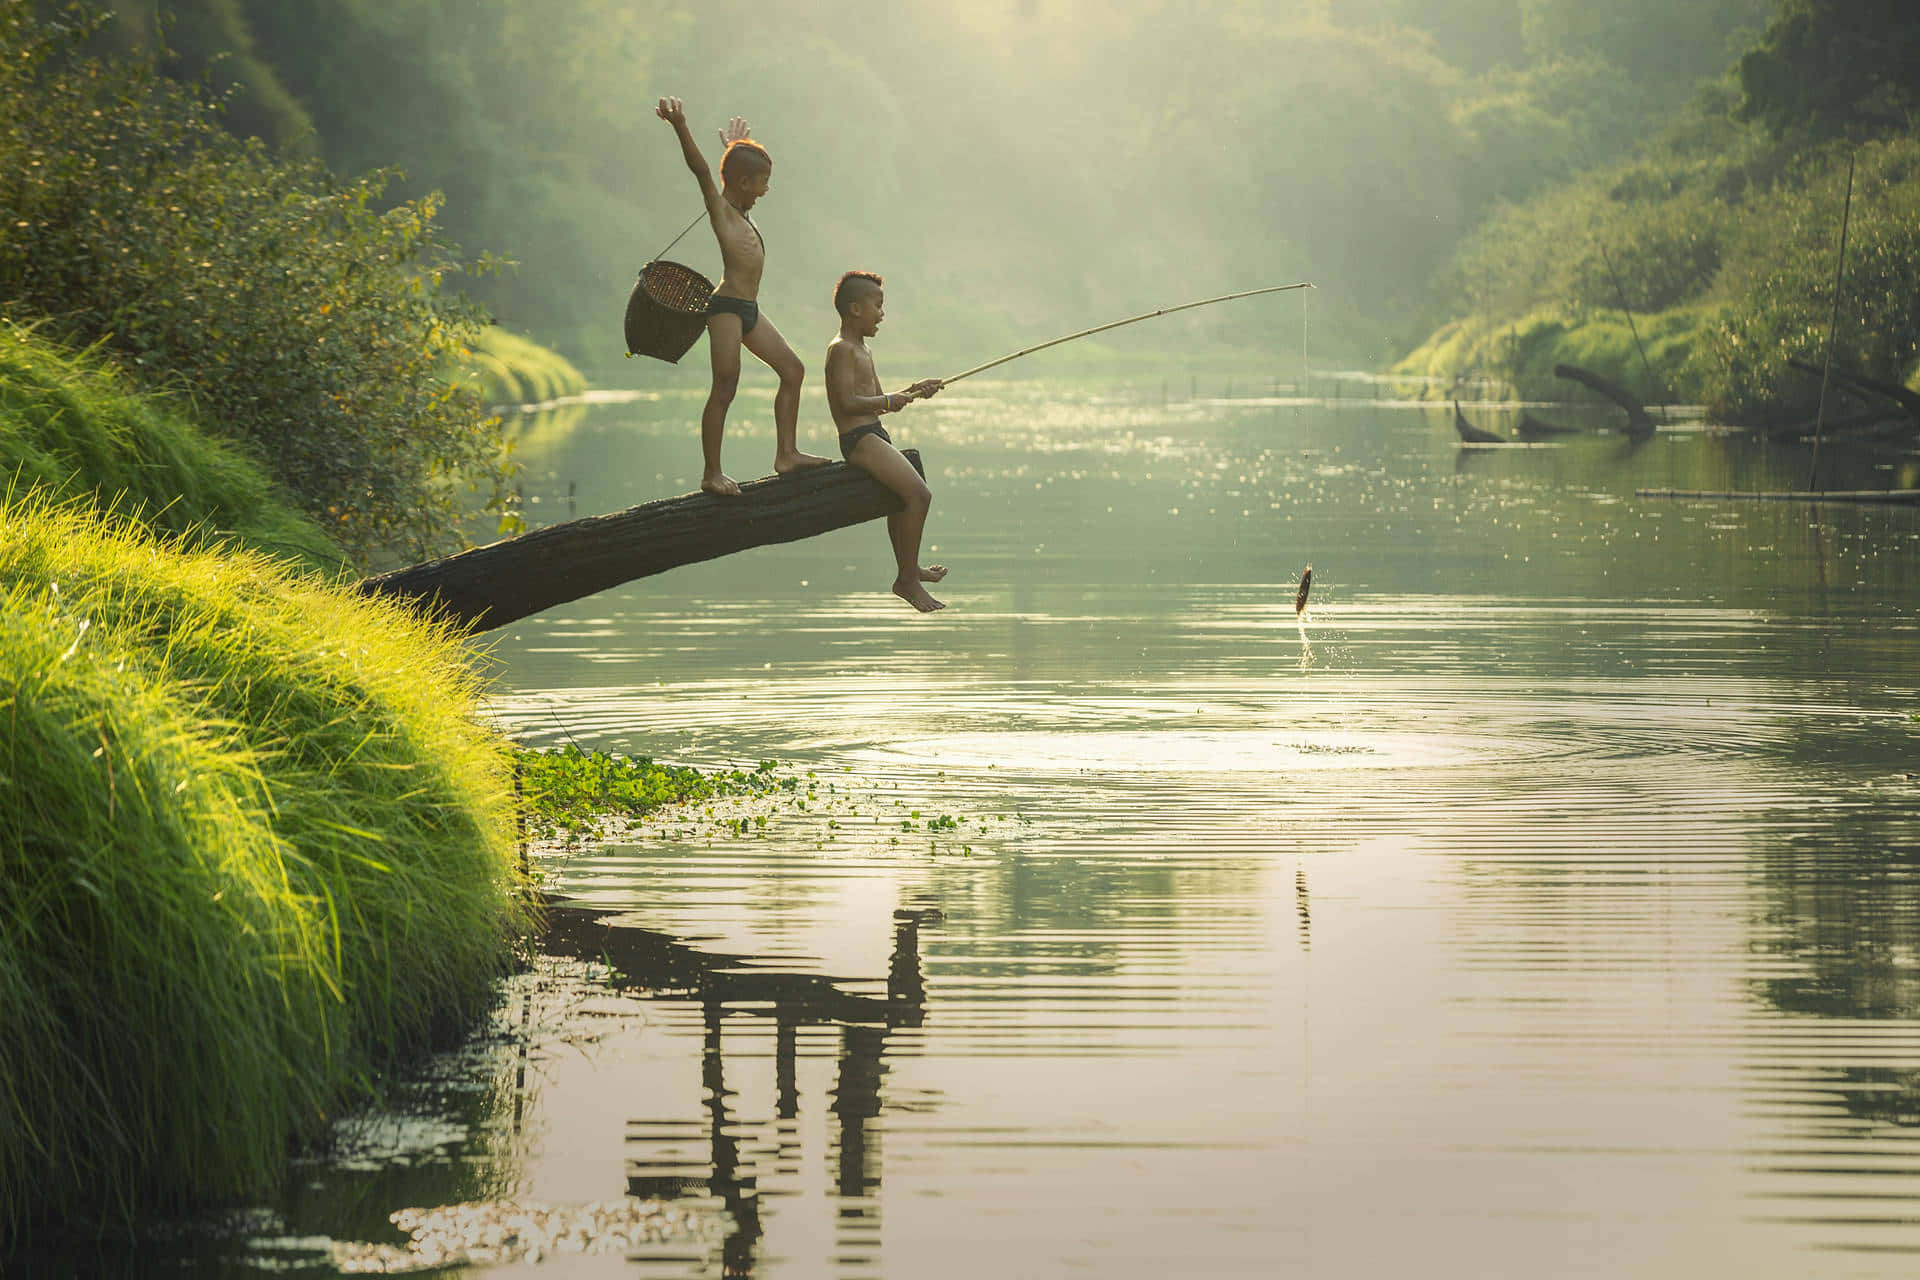 Angler fishing with a sturdy rod on a stunningly beautiful day Wallpaper